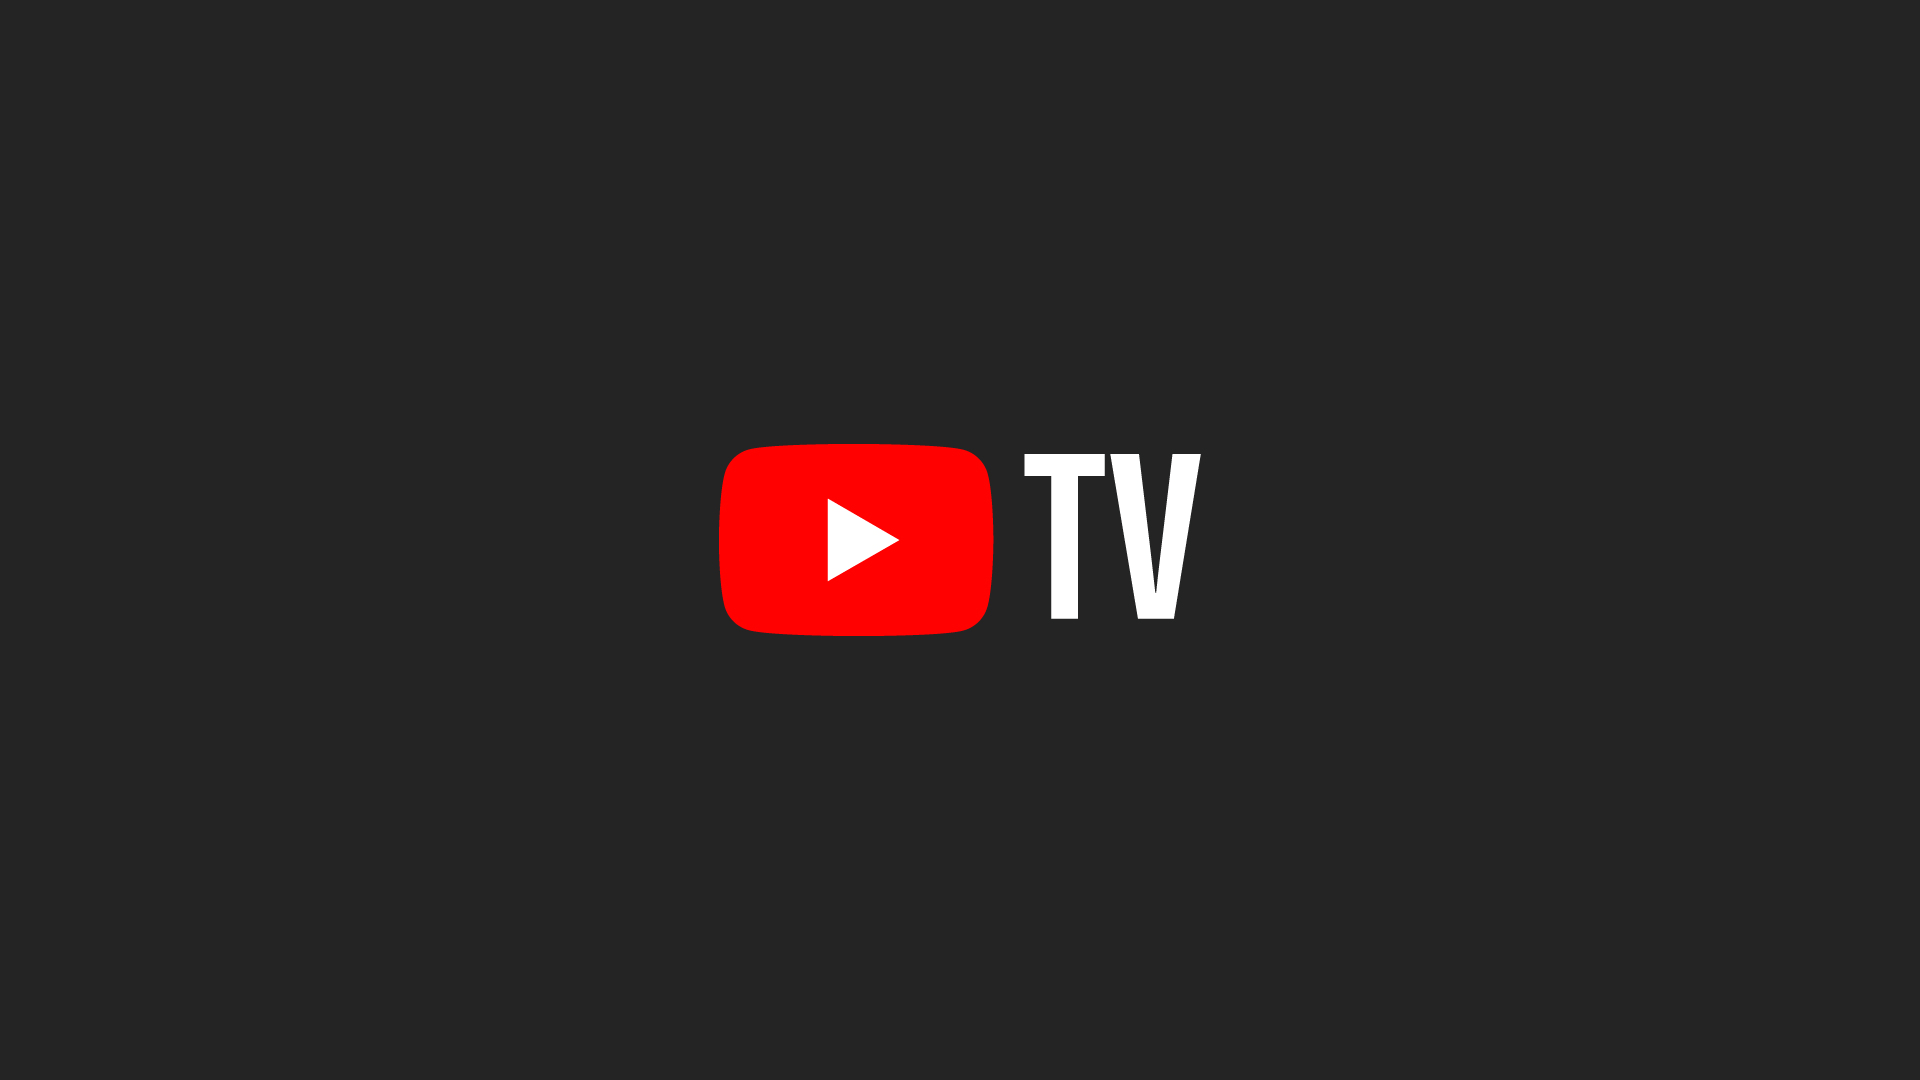 YouTube TV is Dropping the Tennis Channel